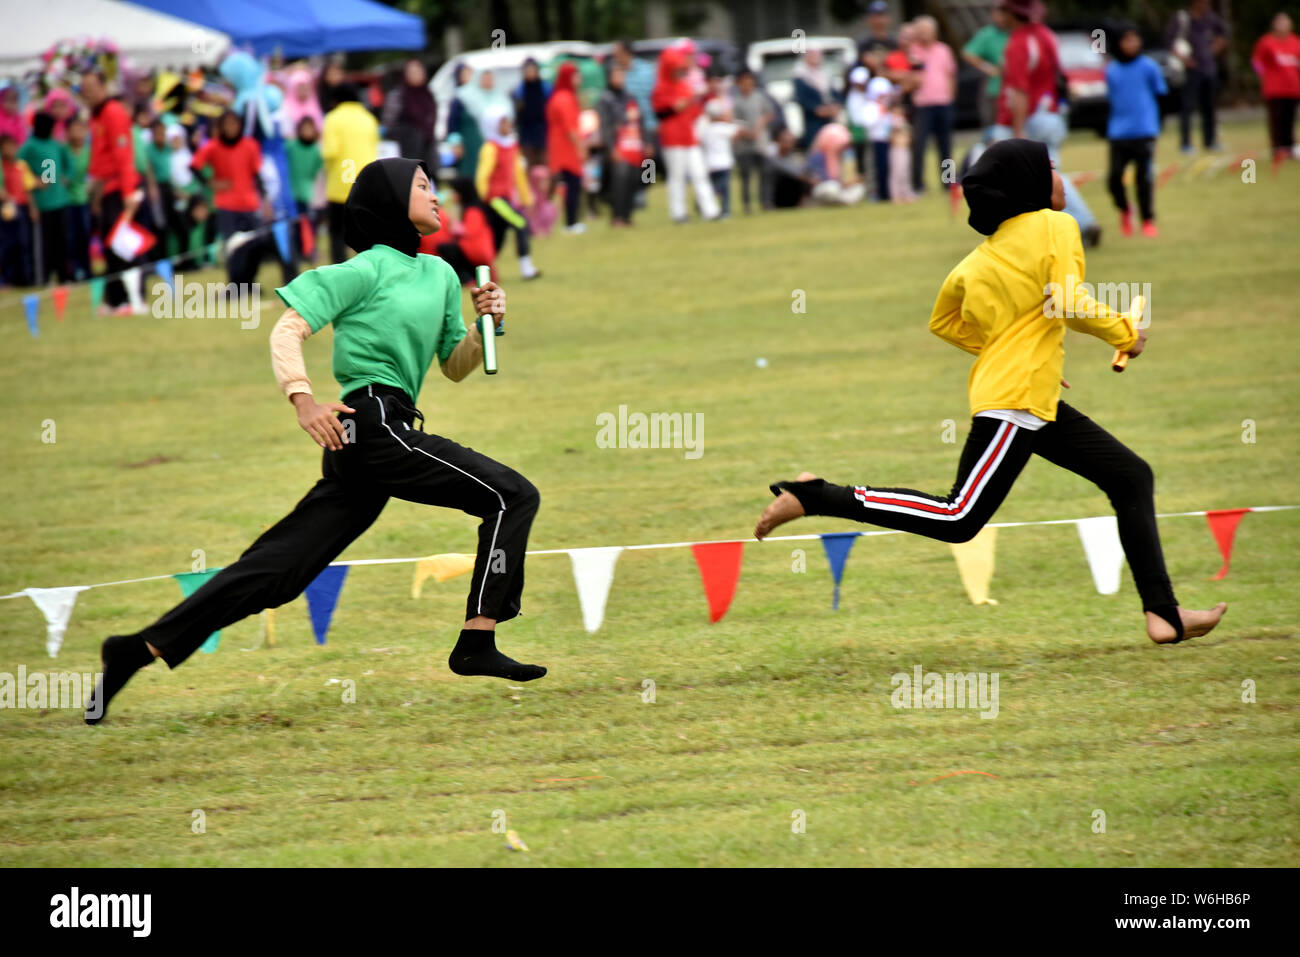 PEKAN, PAHANG - 17 February  2019 Annual elementary school sports days before school close for semester break. Stock Photo